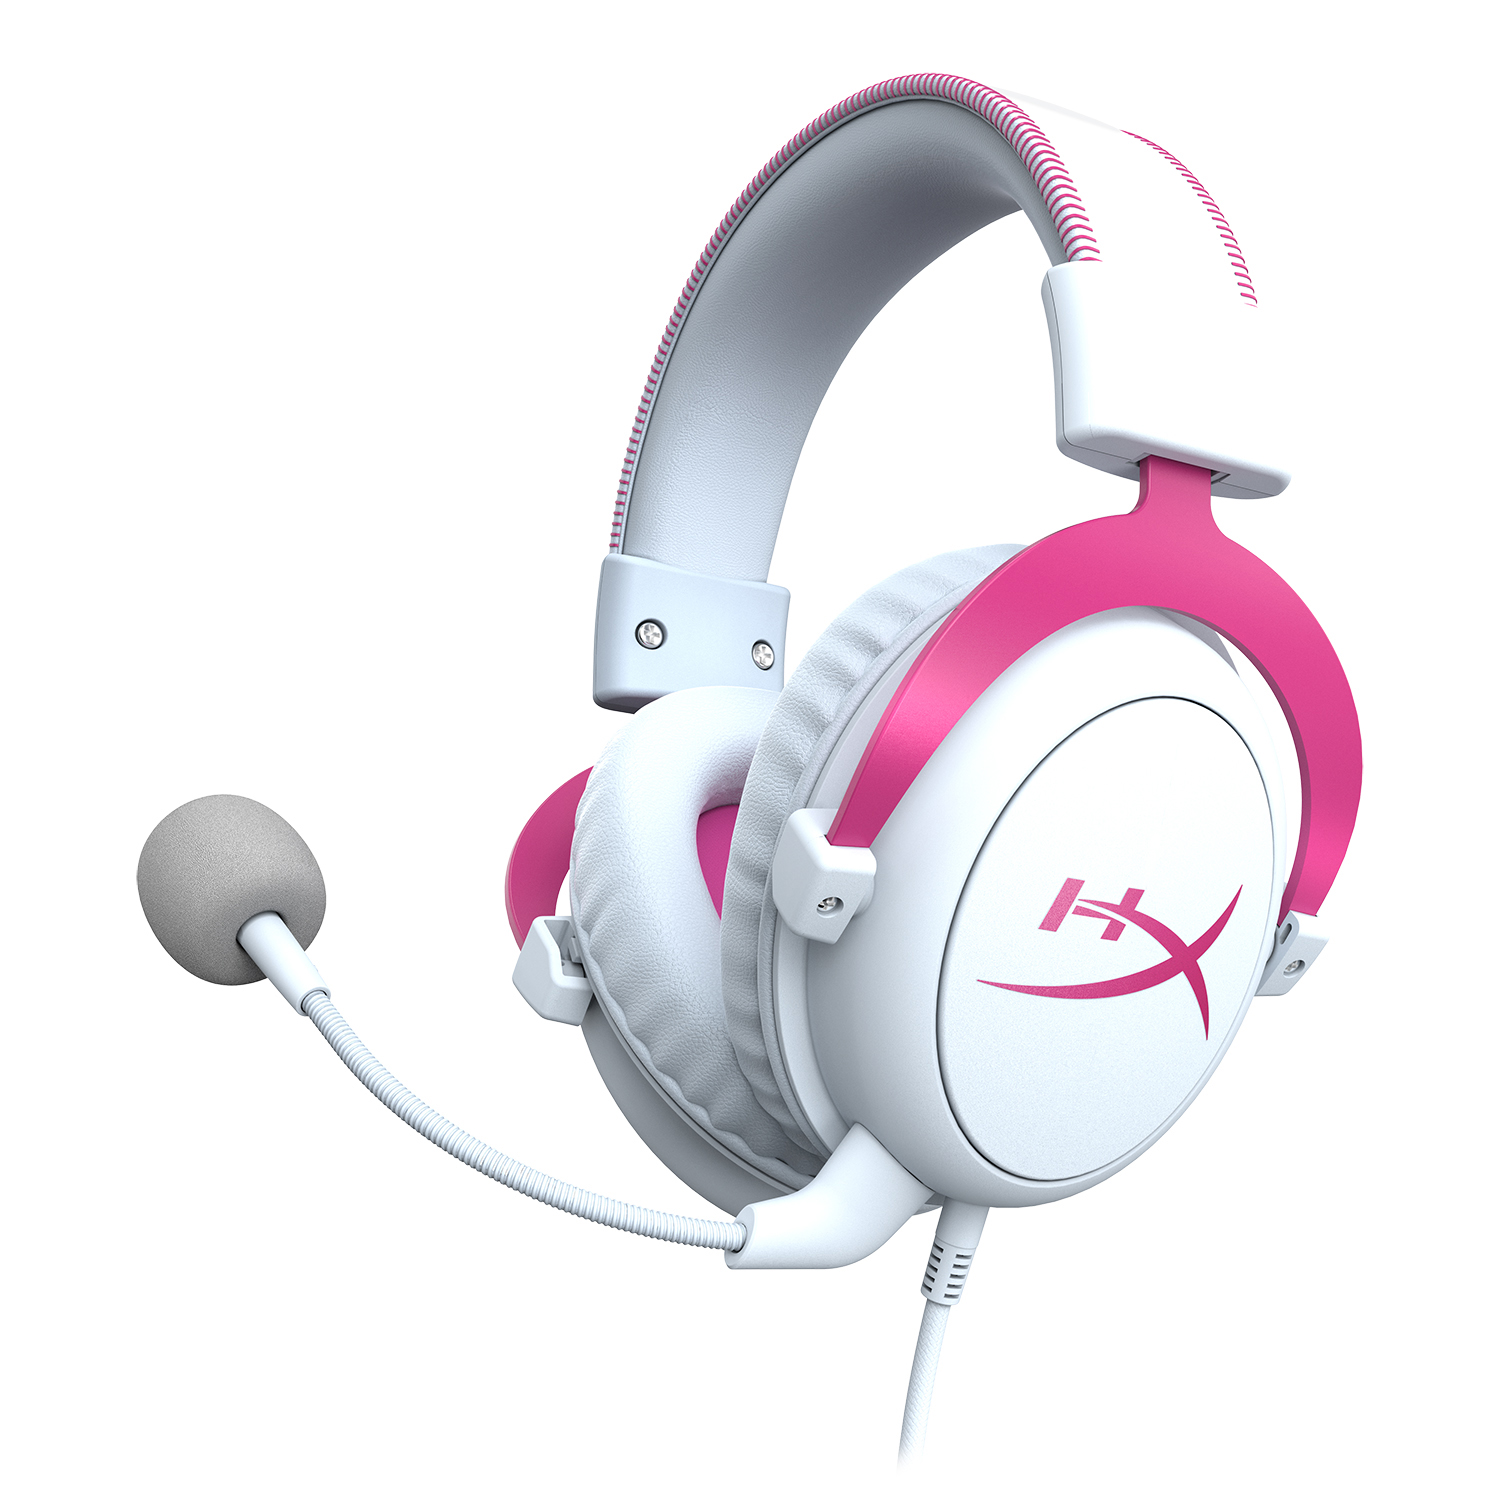 HyperX Cloud II Gaming New colourful introduced with an audio control box and 7.1 virtual surround sound - NotebookCheck.net News